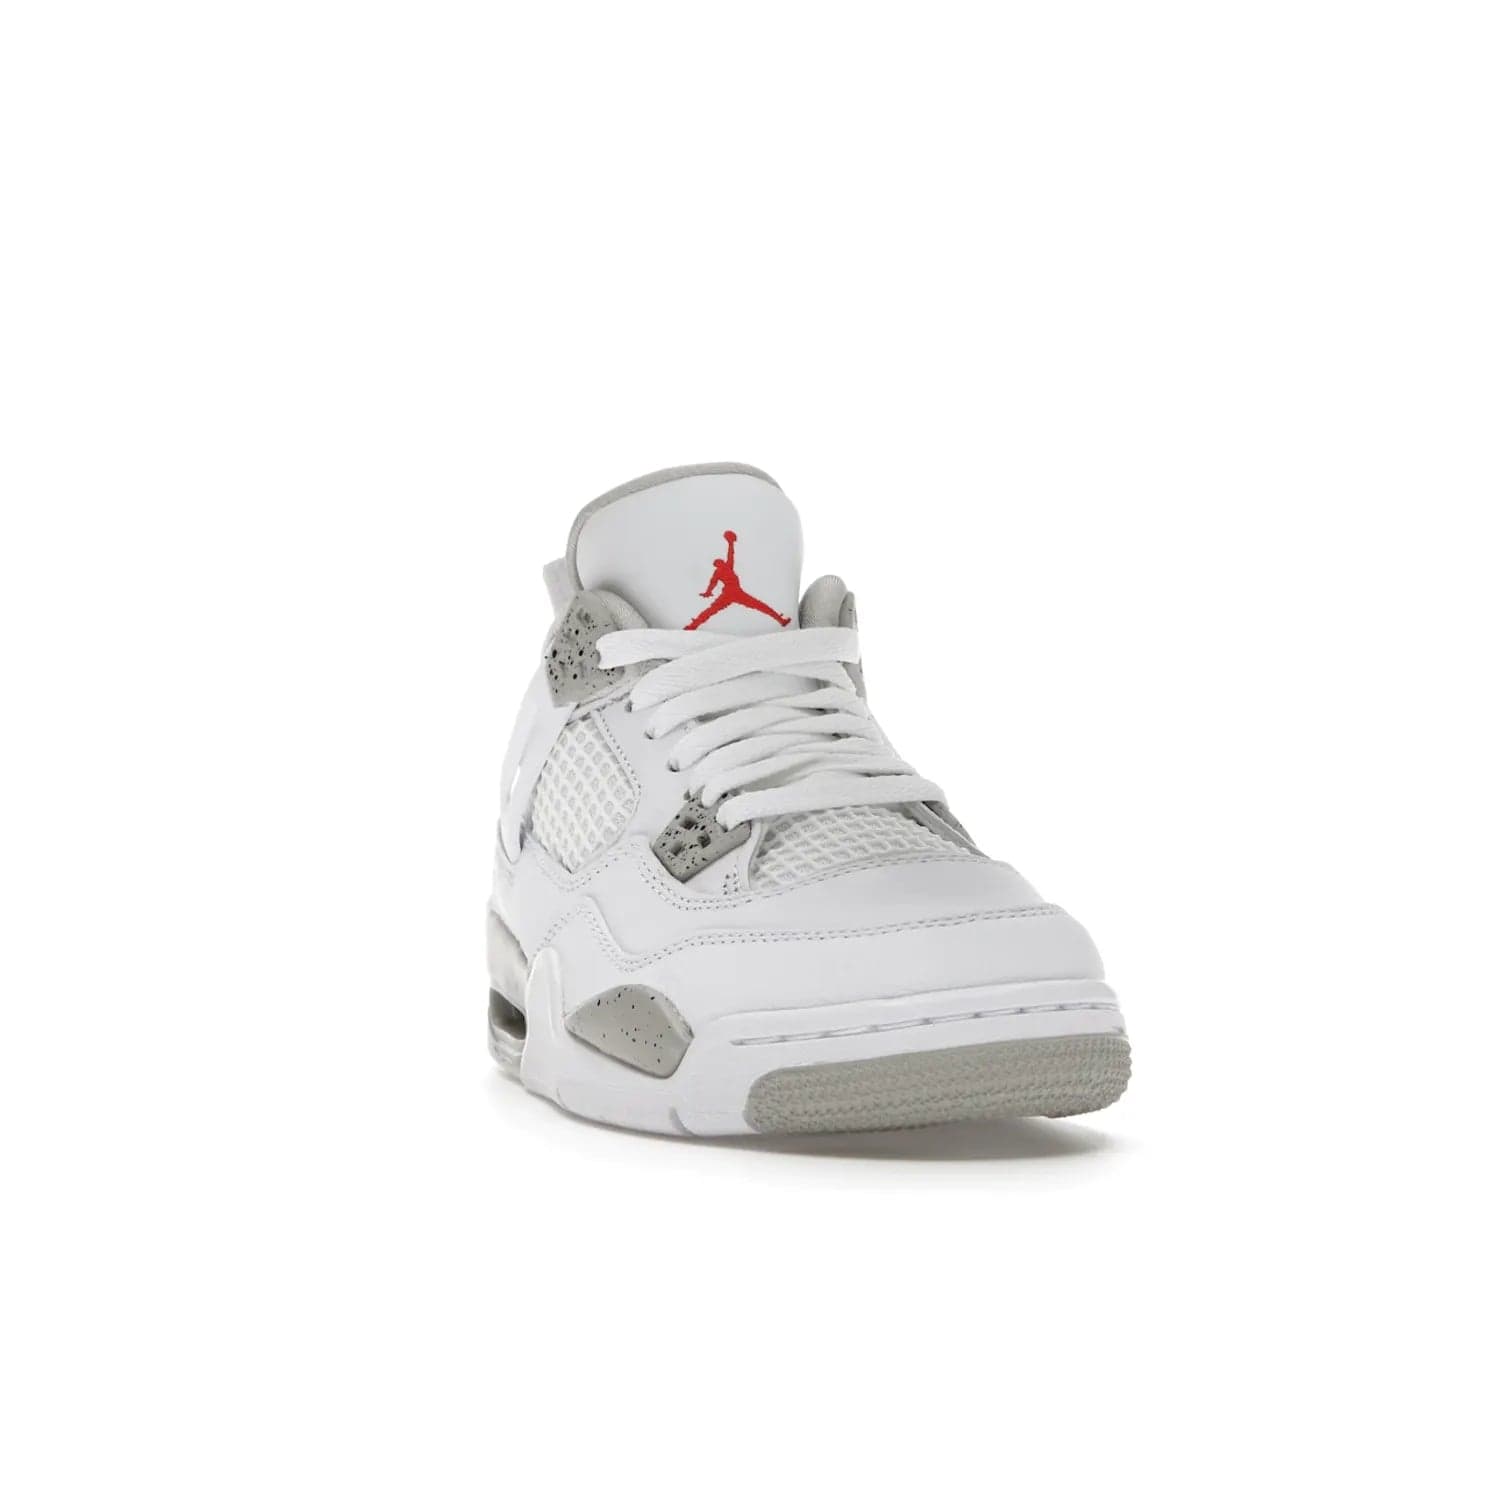 Jordan 4 Retro White Oreo (2021) (GS) - Image 8 - Only at www.BallersClubKickz.com - White Oreo Air Jordan 4 Retro 2021 GS - Iconic sneaker silhouette with white canvas upper, Tech Grey detailing, and Fire Red accents. Available July 2021.